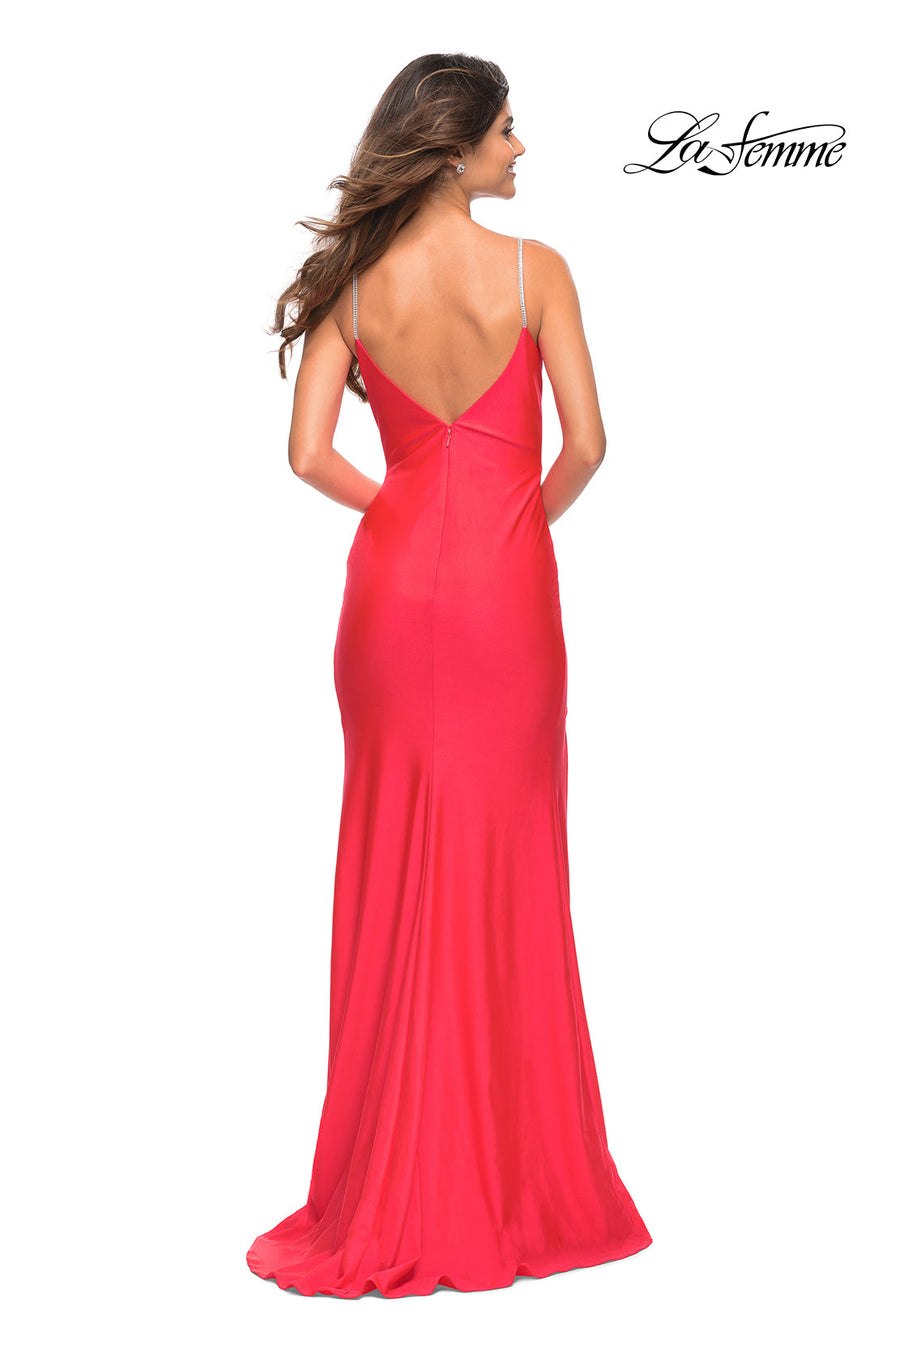 La Femme 30602 prom dress images.  La Femme 30602 is available in these colors: Hot Coral, Hot Pink.